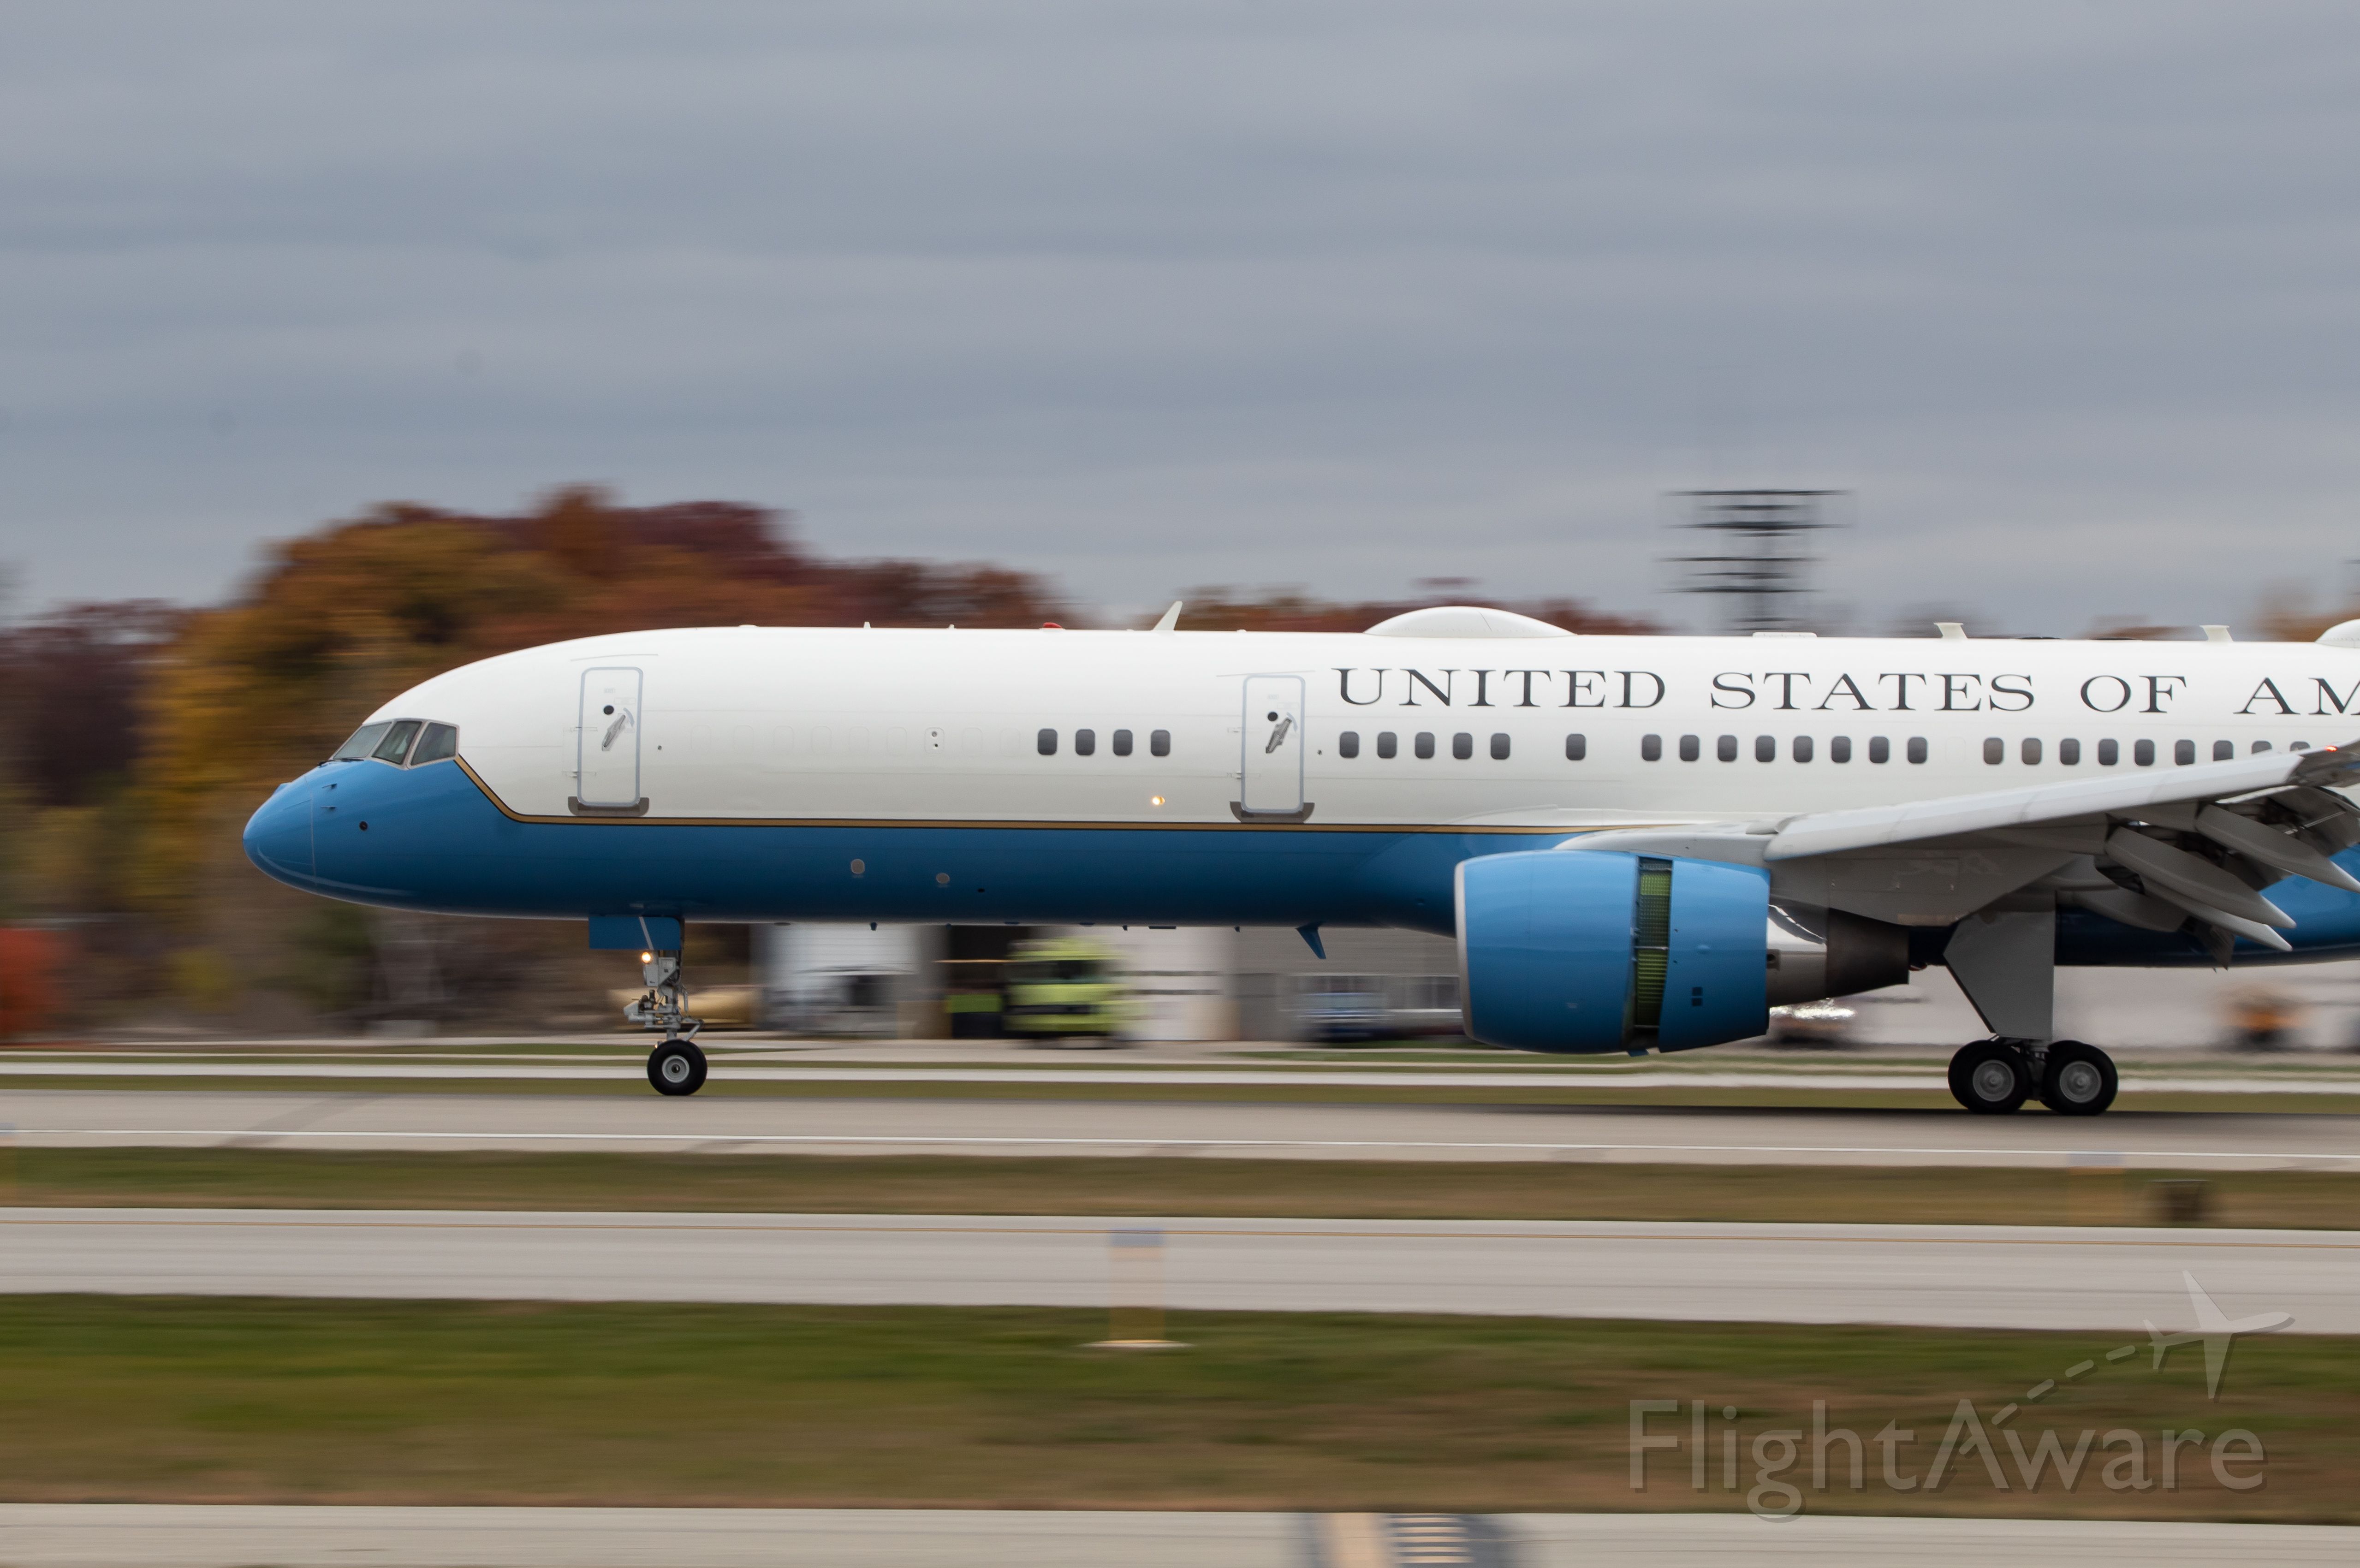 09-0015 — - Air Force 1 slowing down on 27L at PTK.